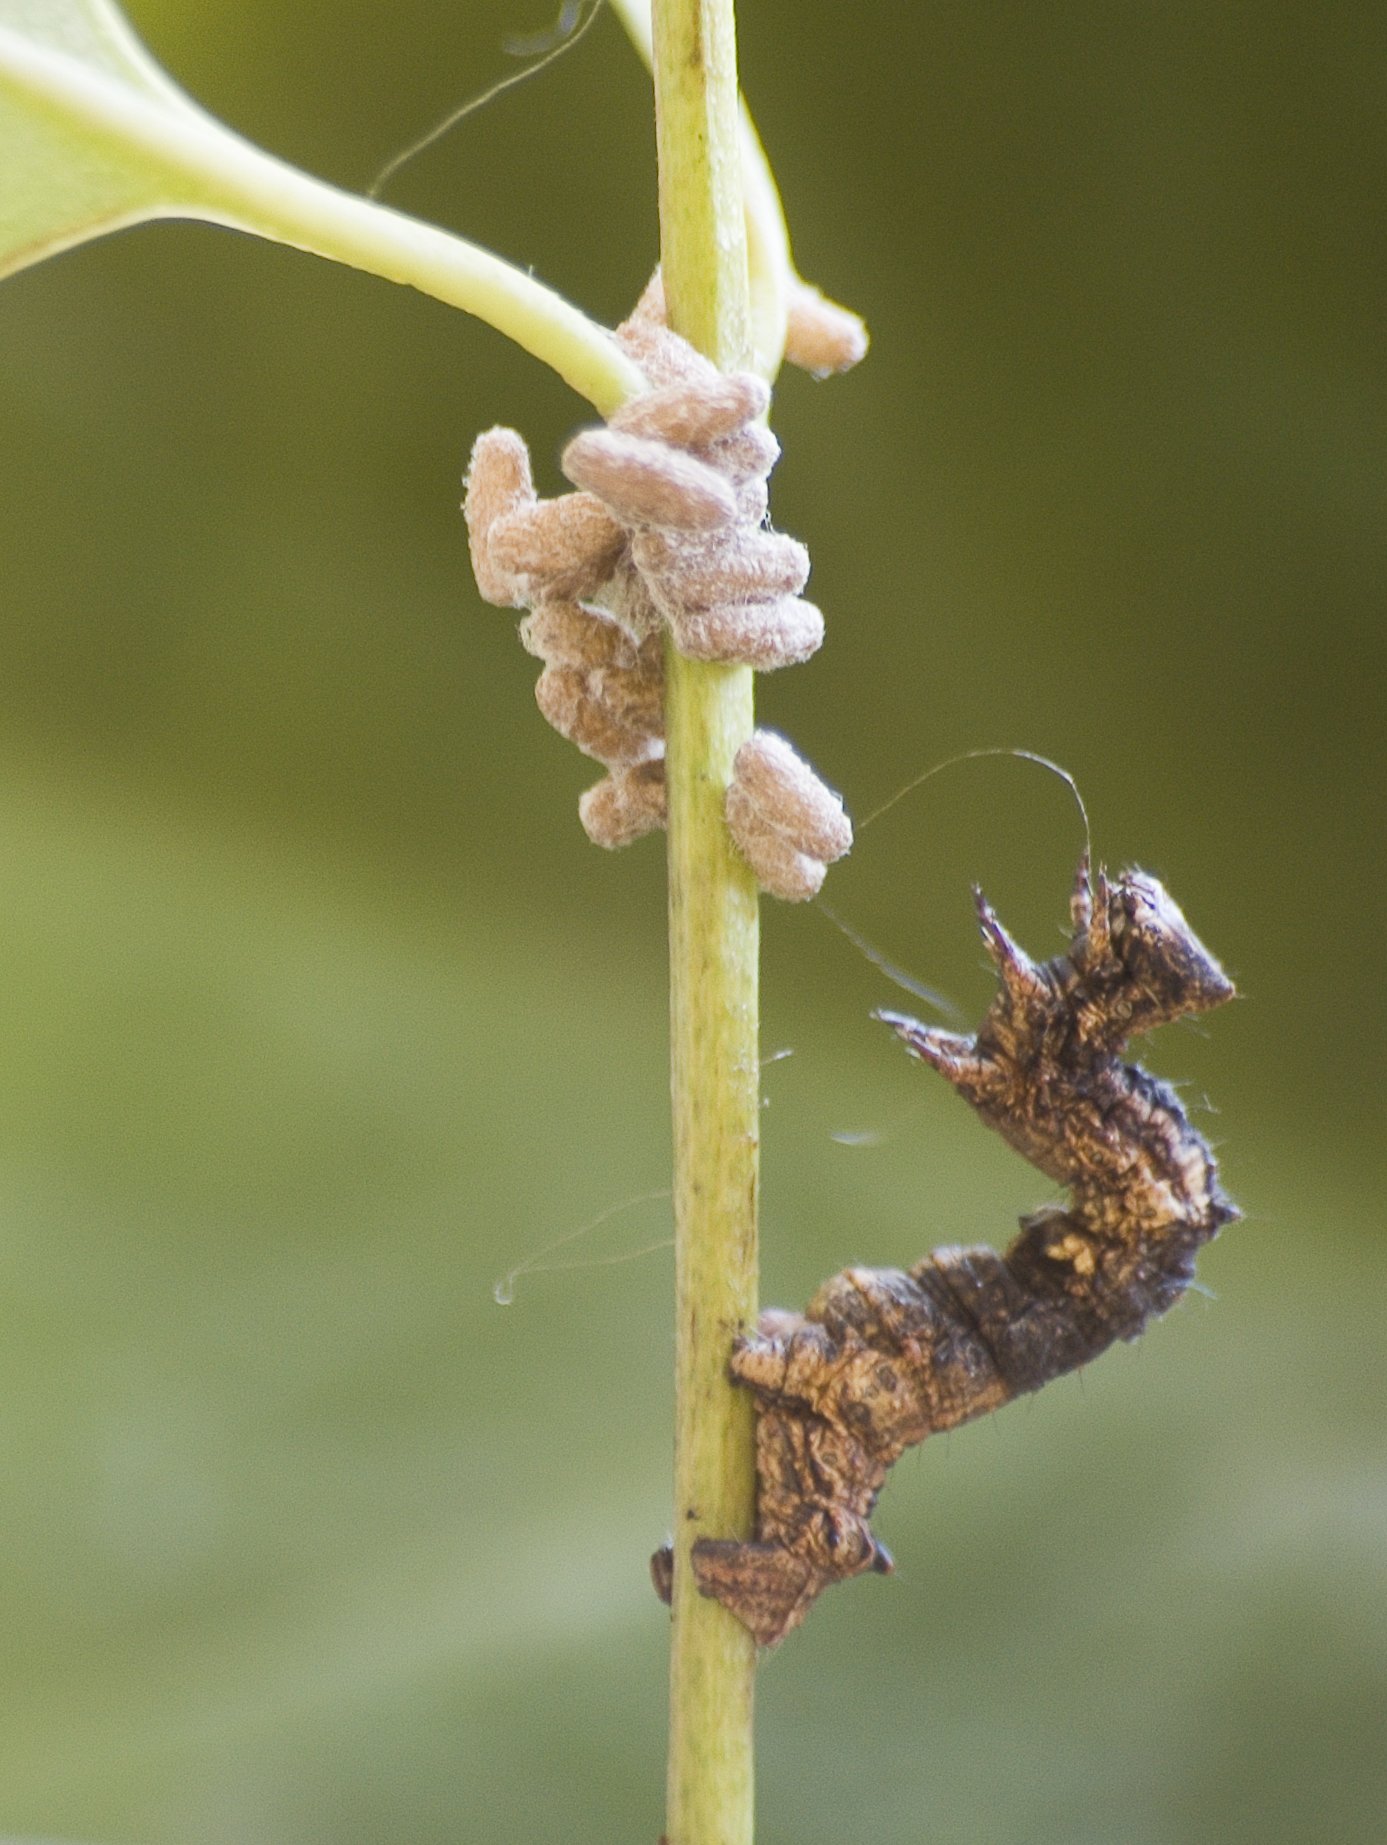 A caterpillar of the geometrid moth with pupae of the Braconid parasitoid wasp